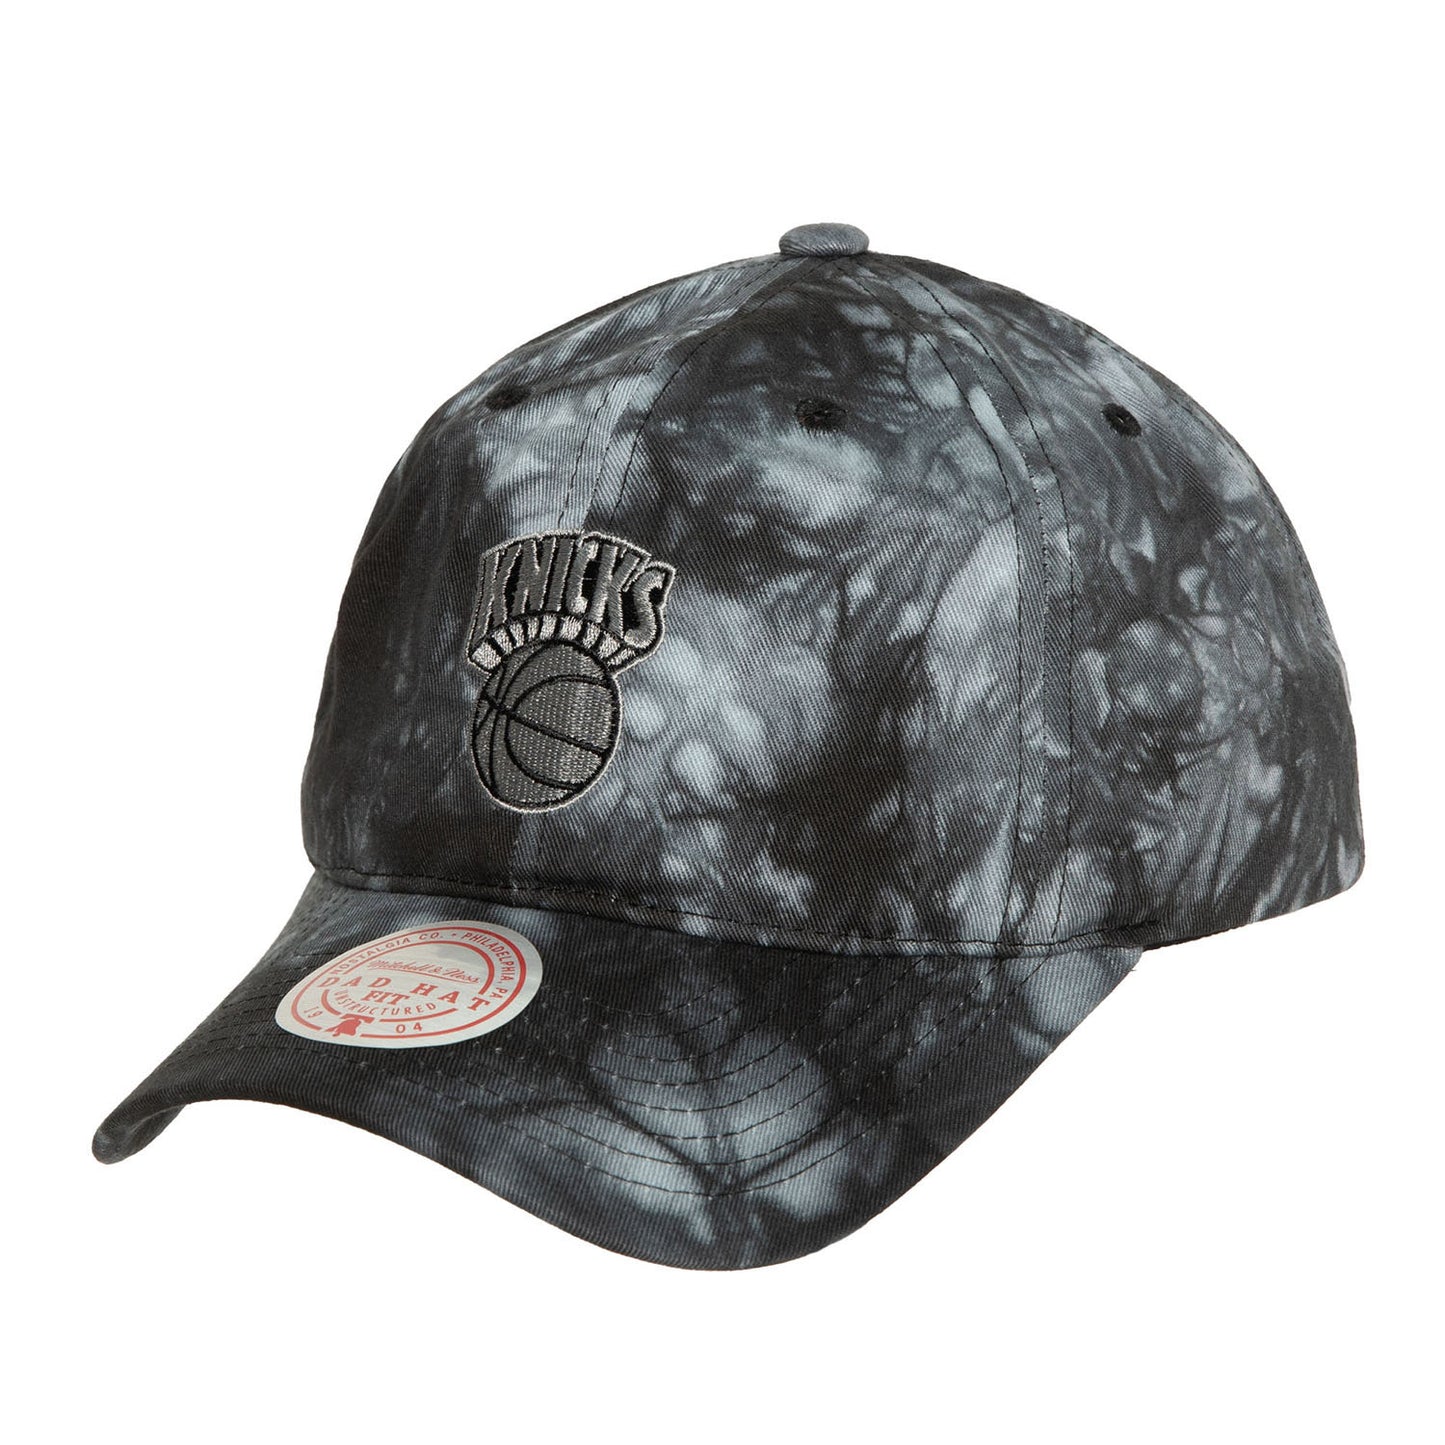 Mitchell & Ness Knicks Tie Dye Dad Hat In Black - Angled Left Side View